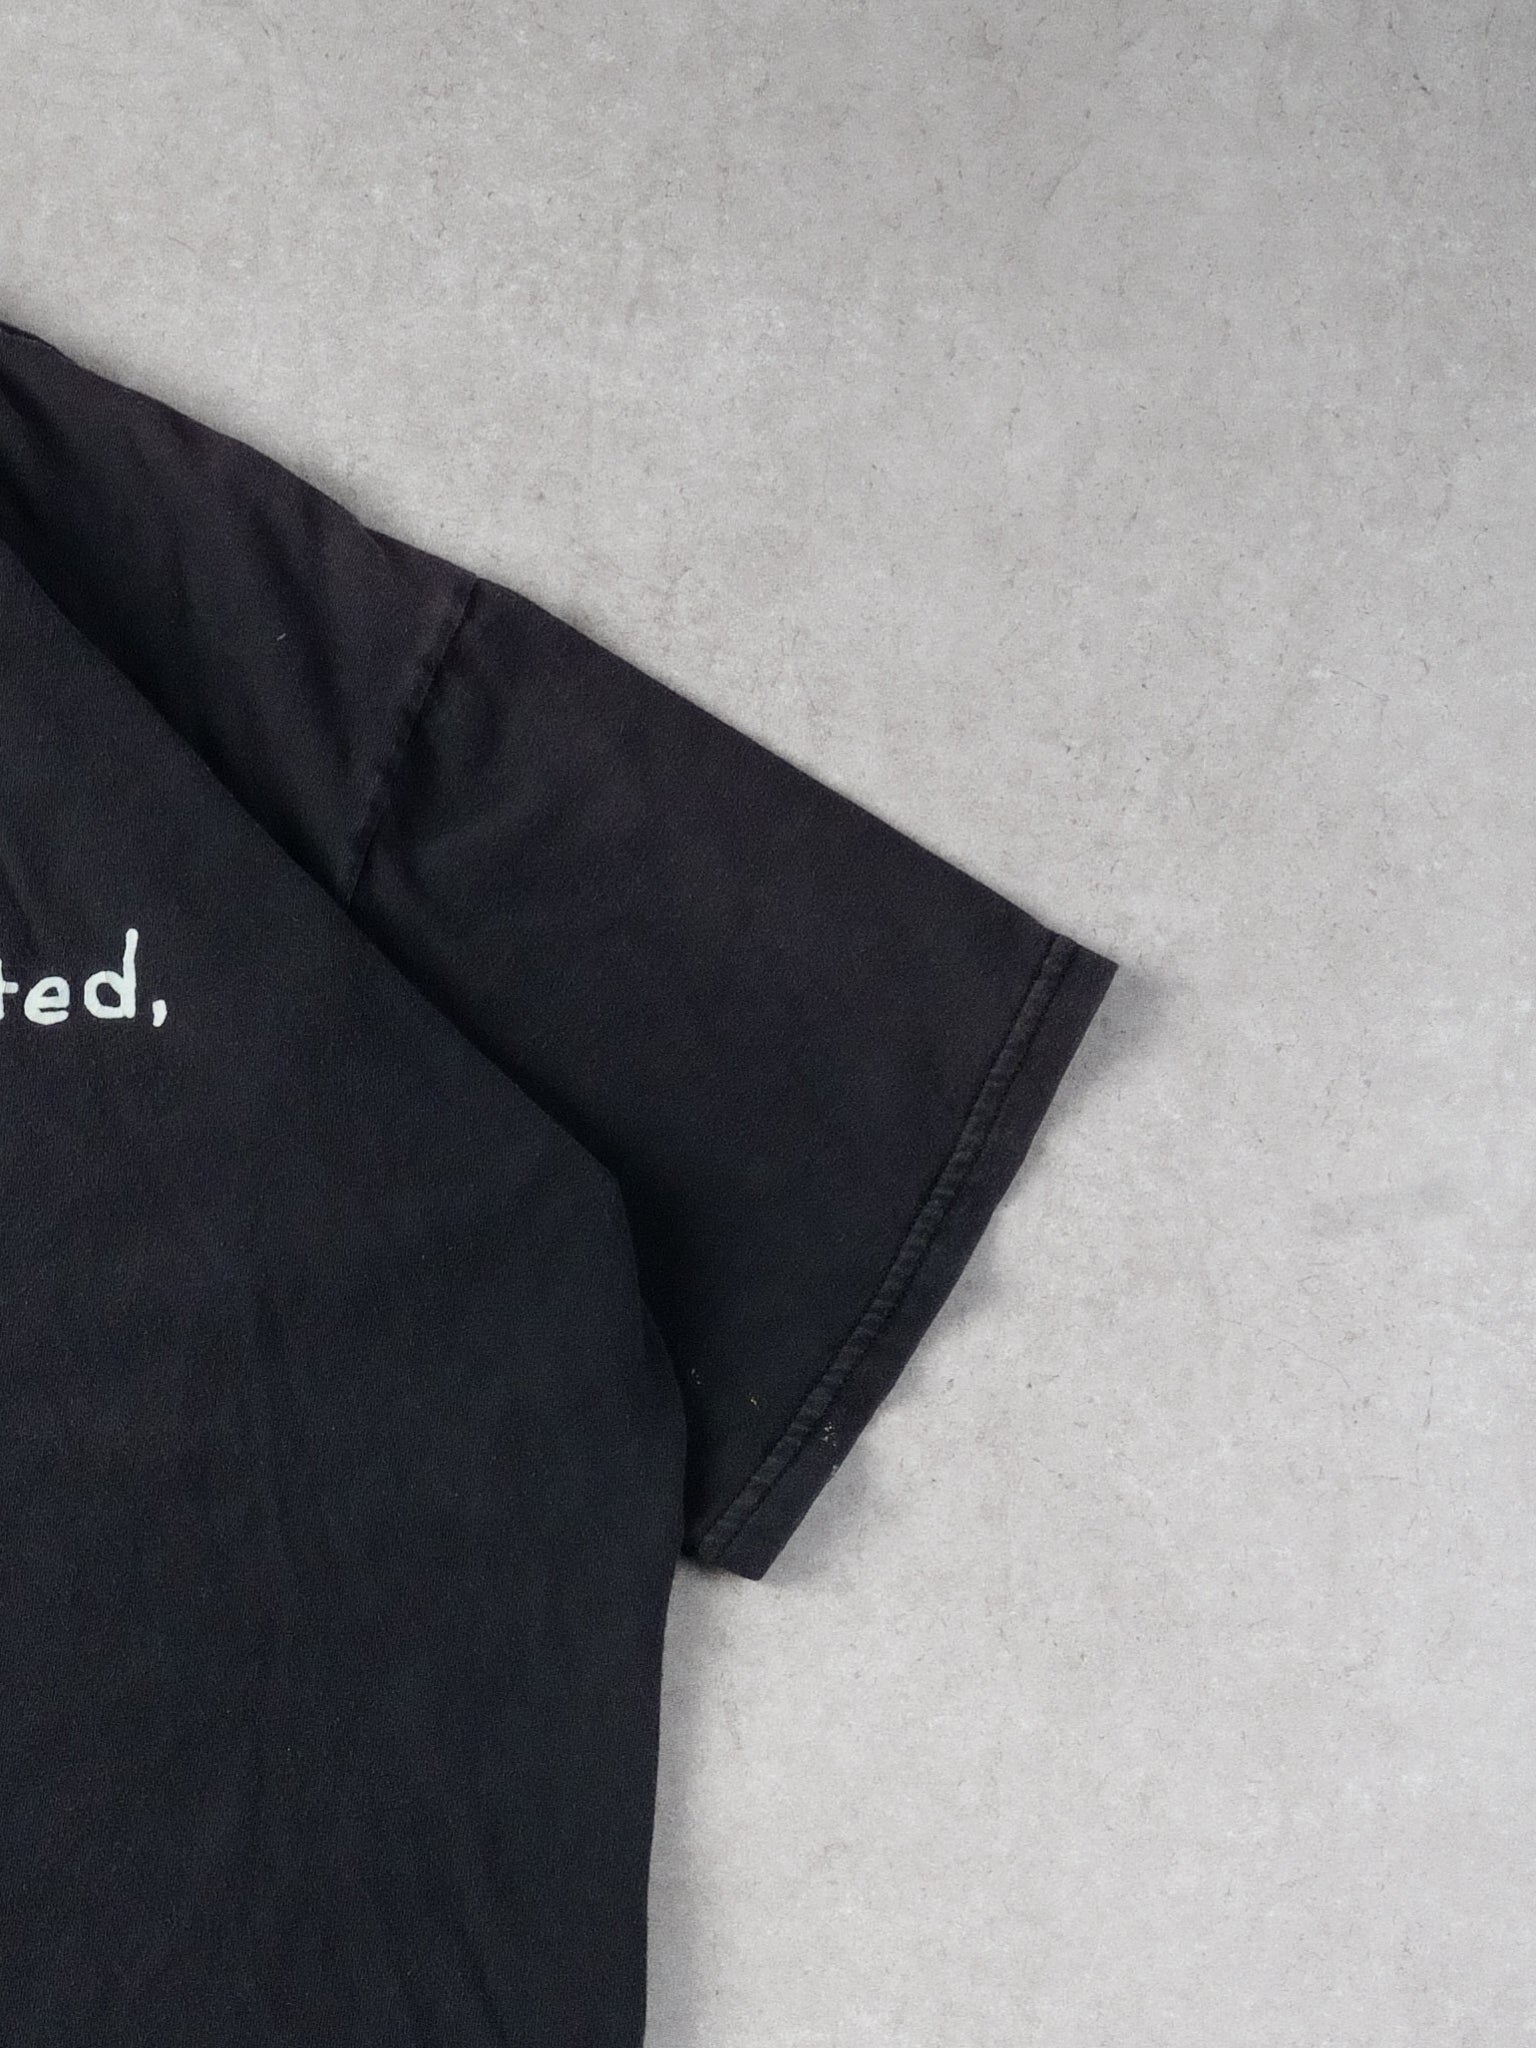 Vintage 97' Washed Black "Sorry if I Looked Internested I'm Not" Tee (L)